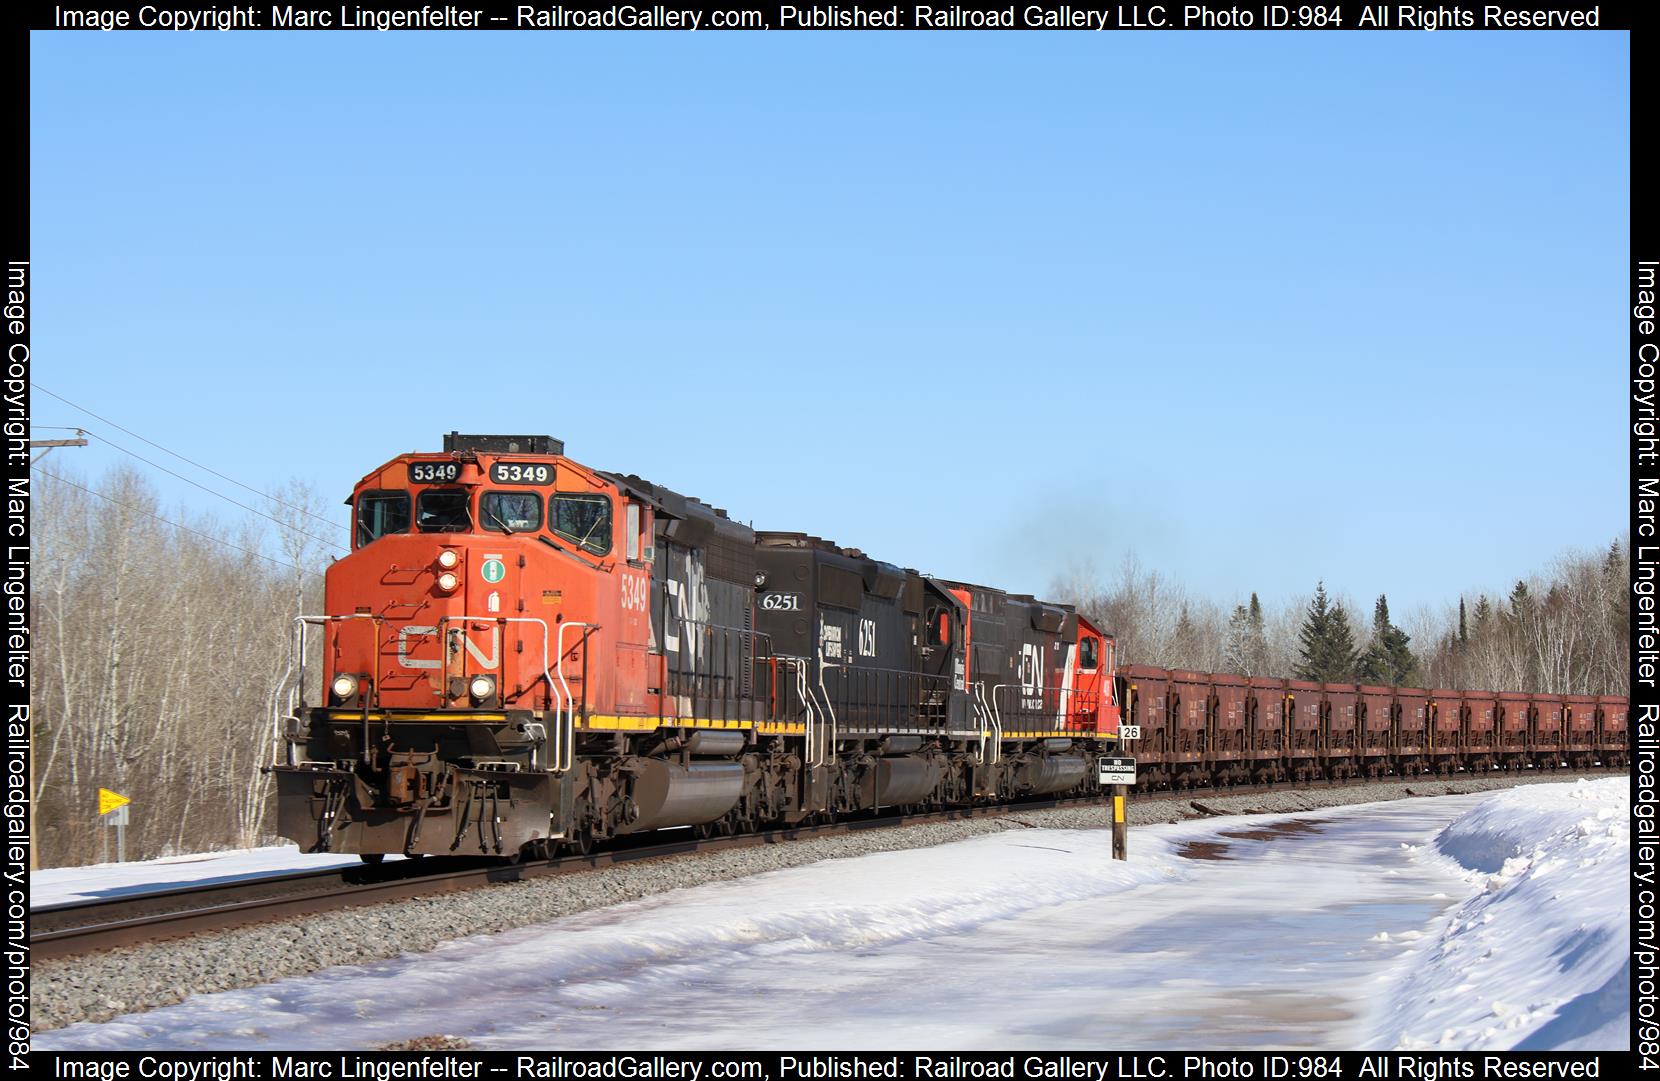 CN 5349 is a class EMD SD40-2W and  is pictured in Burnett, Minnesota, USA.  This was taken along the CN Missabe Sub on the Canadian National Railway. Photo Copyright: Marc Lingenfelter uploaded to Railroad Gallery on 04/21/2023. This photograph of CN 5349 was taken on Friday, March 24, 2023. All Rights Reserved. 